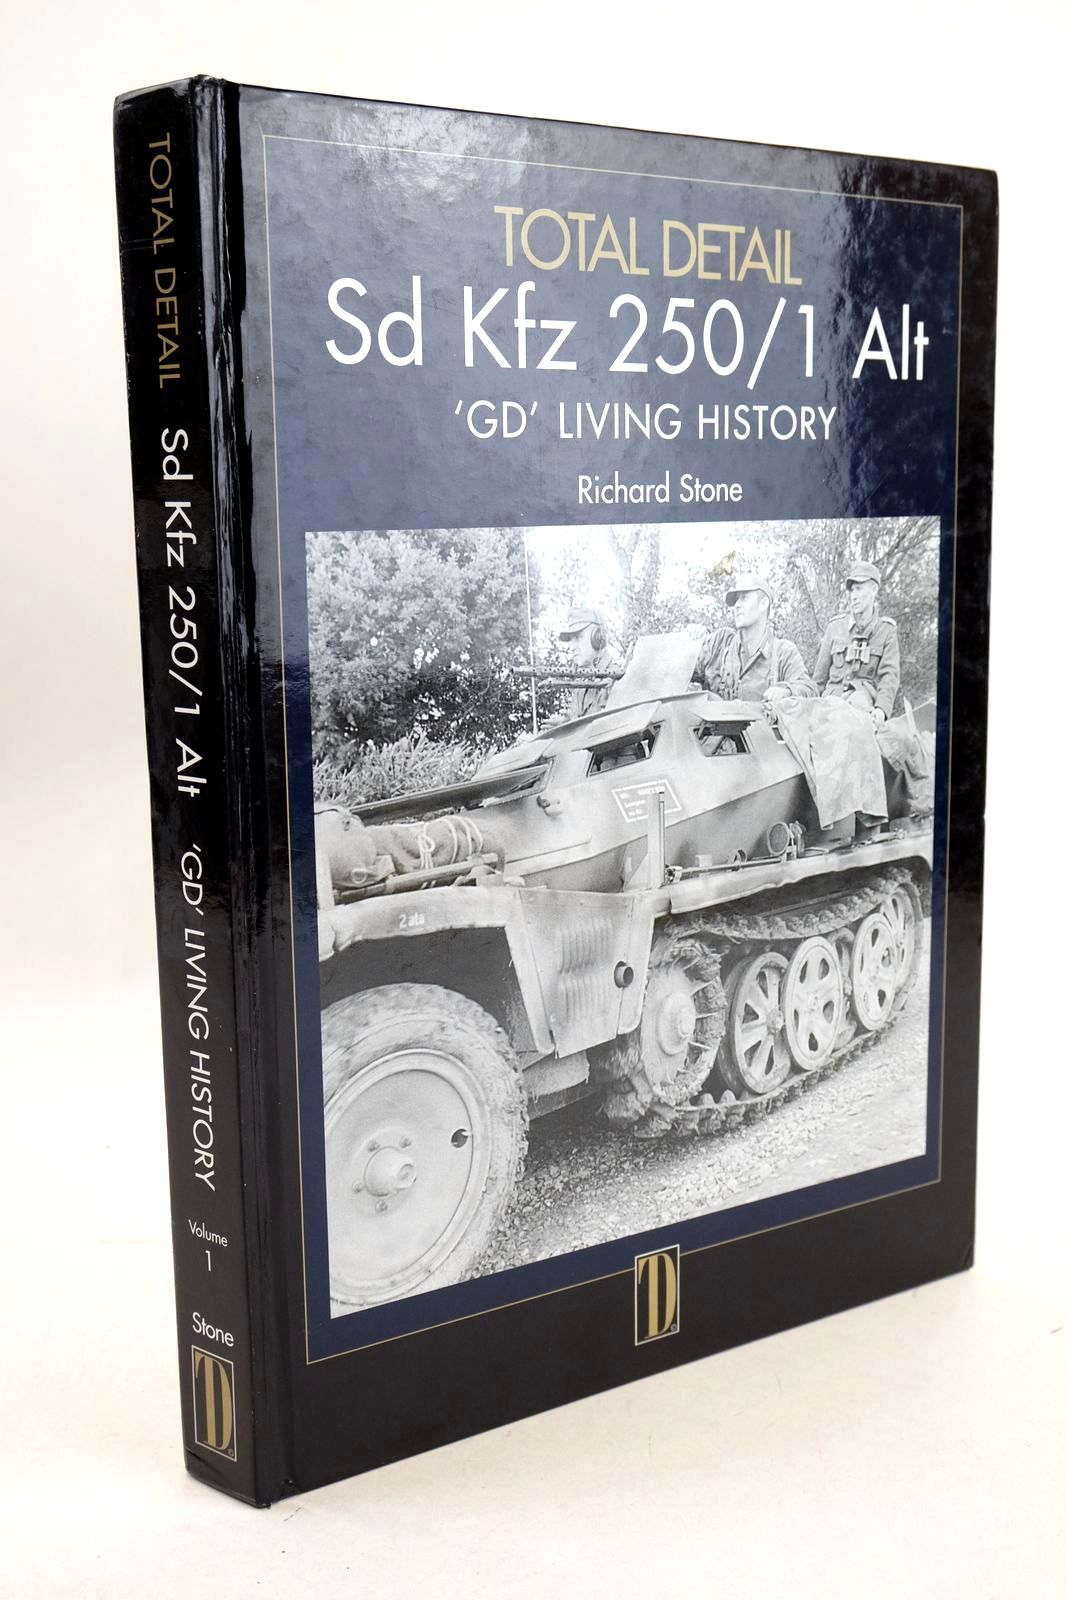 Photo of TOTAL DETAIL: SD KFZ 250/1 ALT VOLUME 1 'GD' LIVING HISTORY written by Stone, Richard published by Total Detail Publications Ltd (STOCK CODE: 1327038)  for sale by Stella & Rose's Books